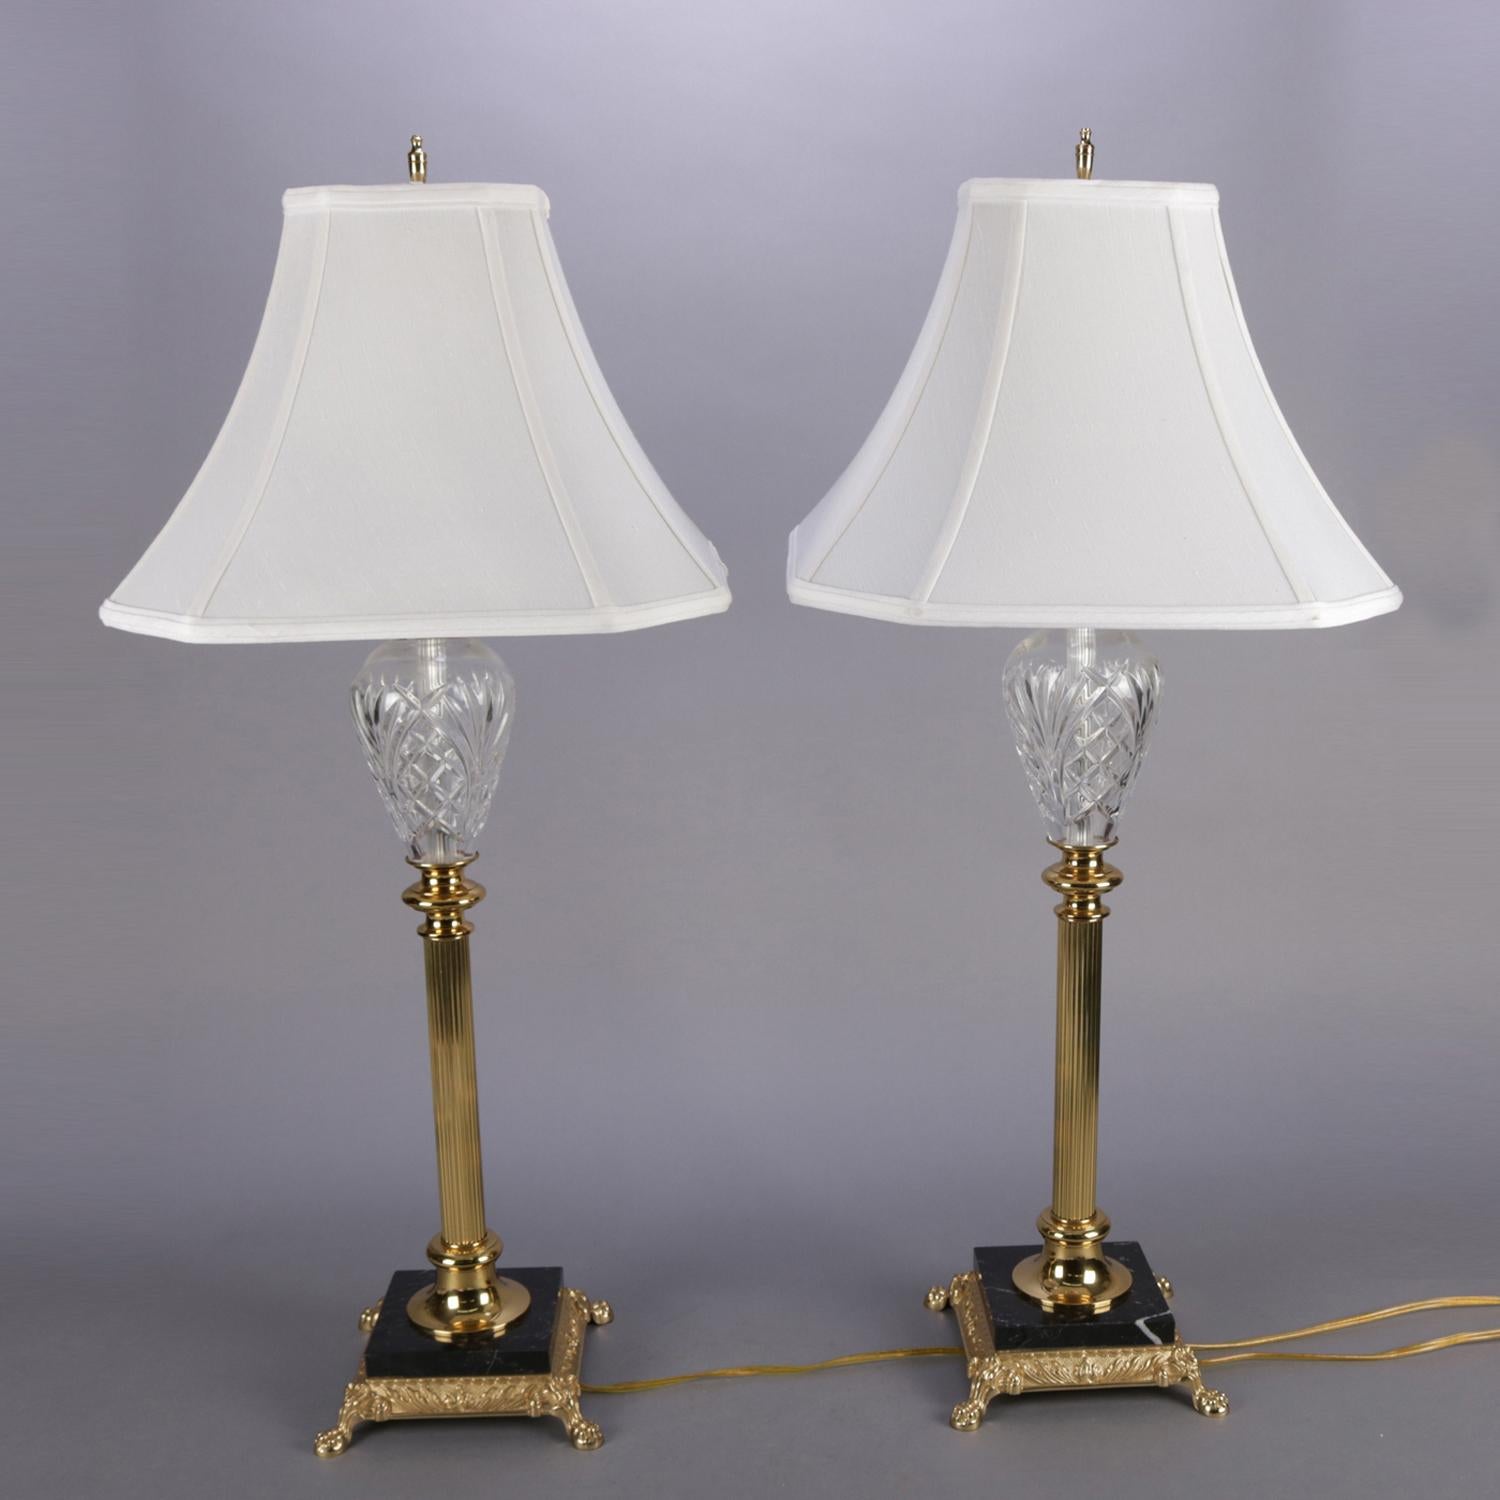 Pair of Irish Waterford Marlow regency table lamps feature cut crystal font over reeded brass Corinthian column form pedestal and seated on black marble base supported by cast brass paw foot frame, signed Waterford on shade, base and font, electric,